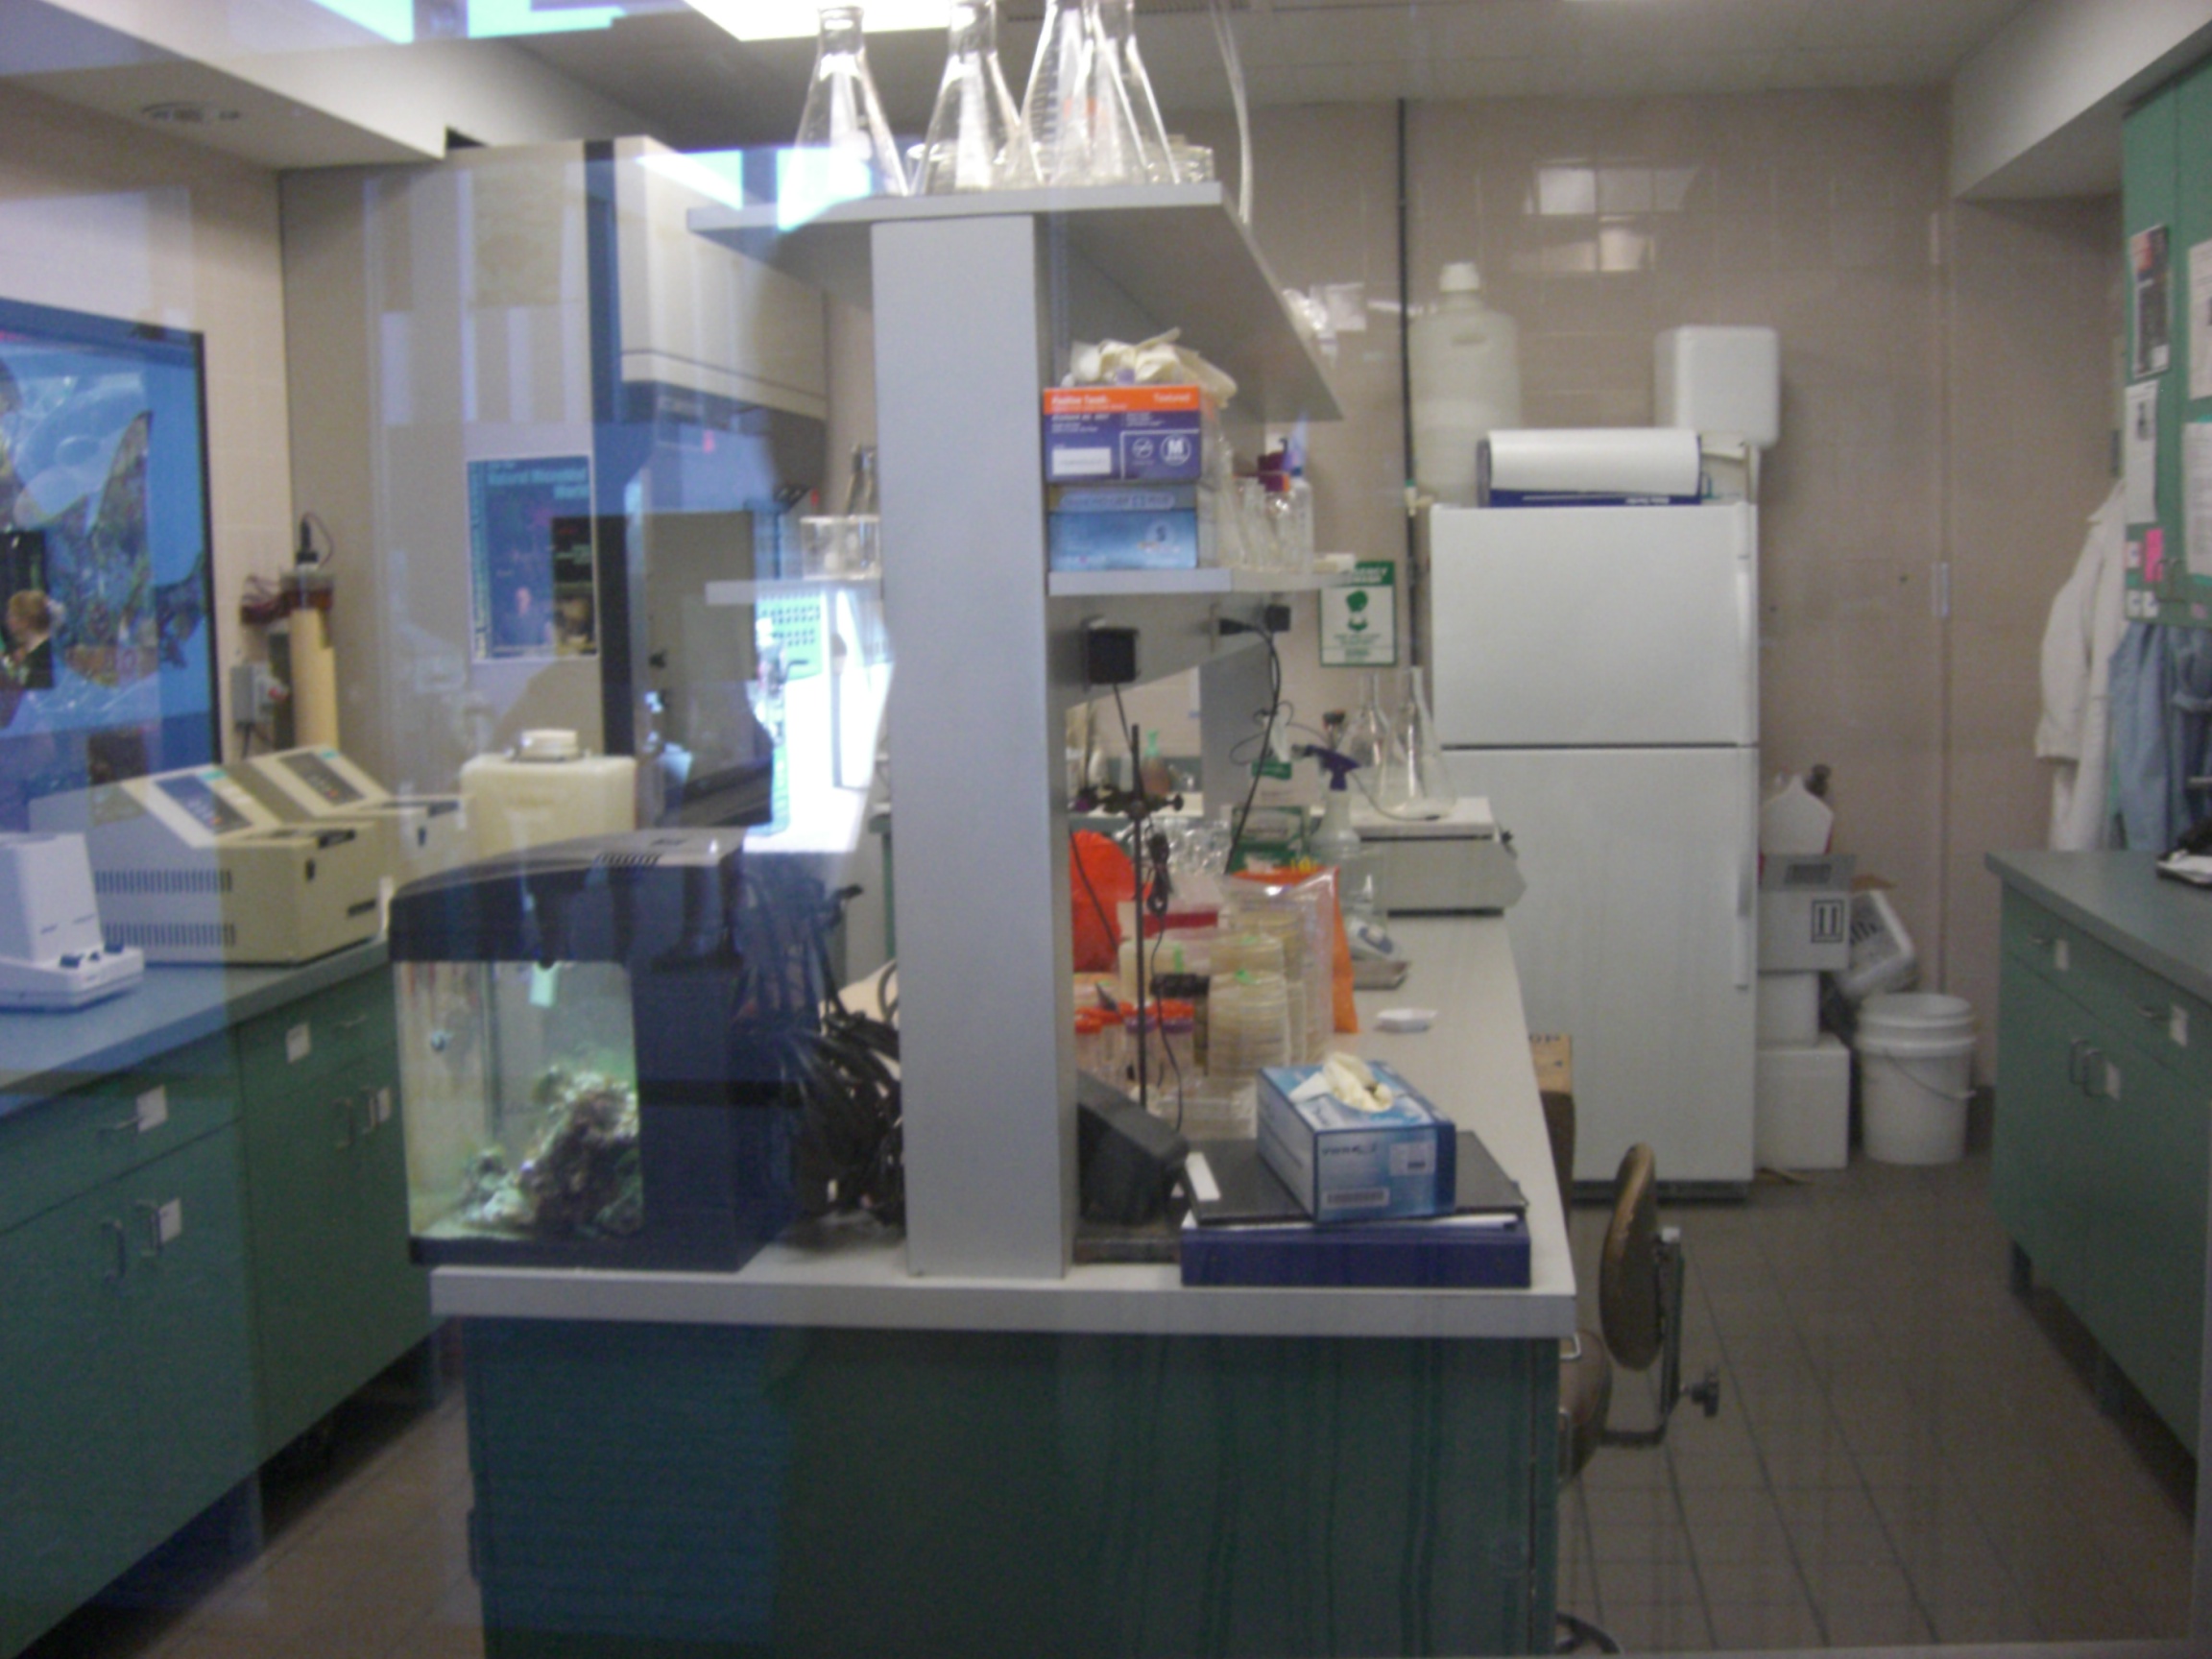 'Behind the Scenes at the Lab' Exhibit